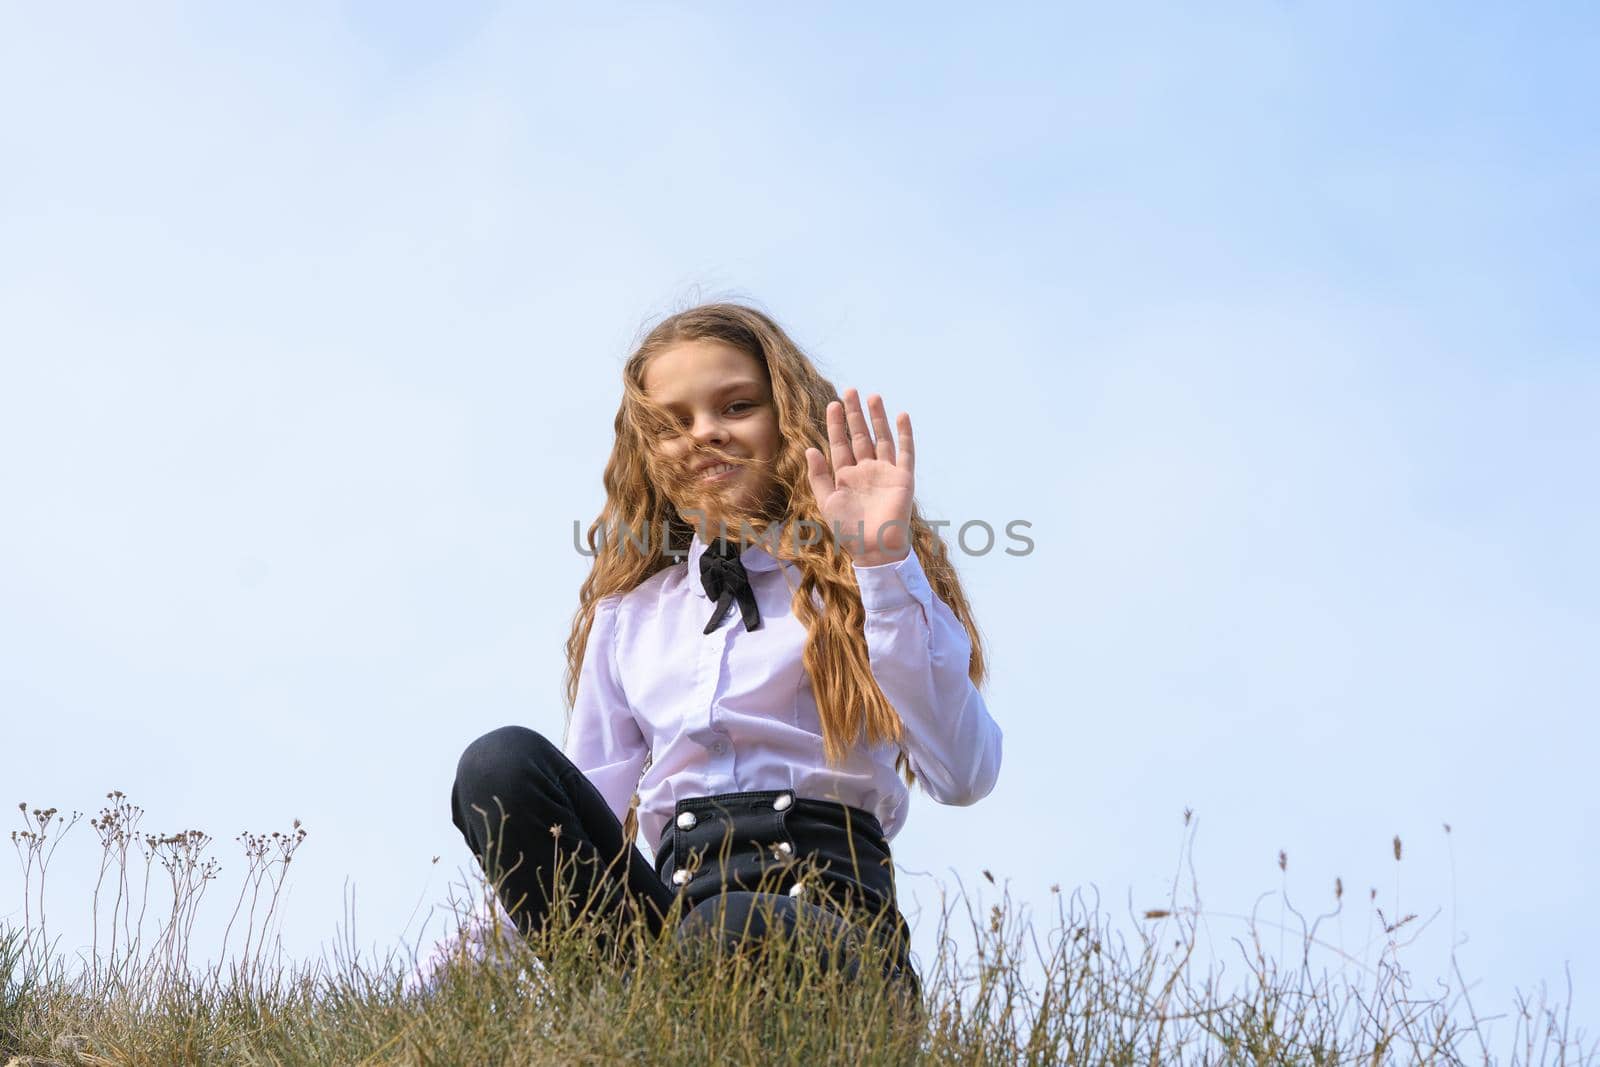 A girl in a white shirt with a bow tie sits on the ground in a field against the background of the sky and waves a pen to the frame by Madhourse